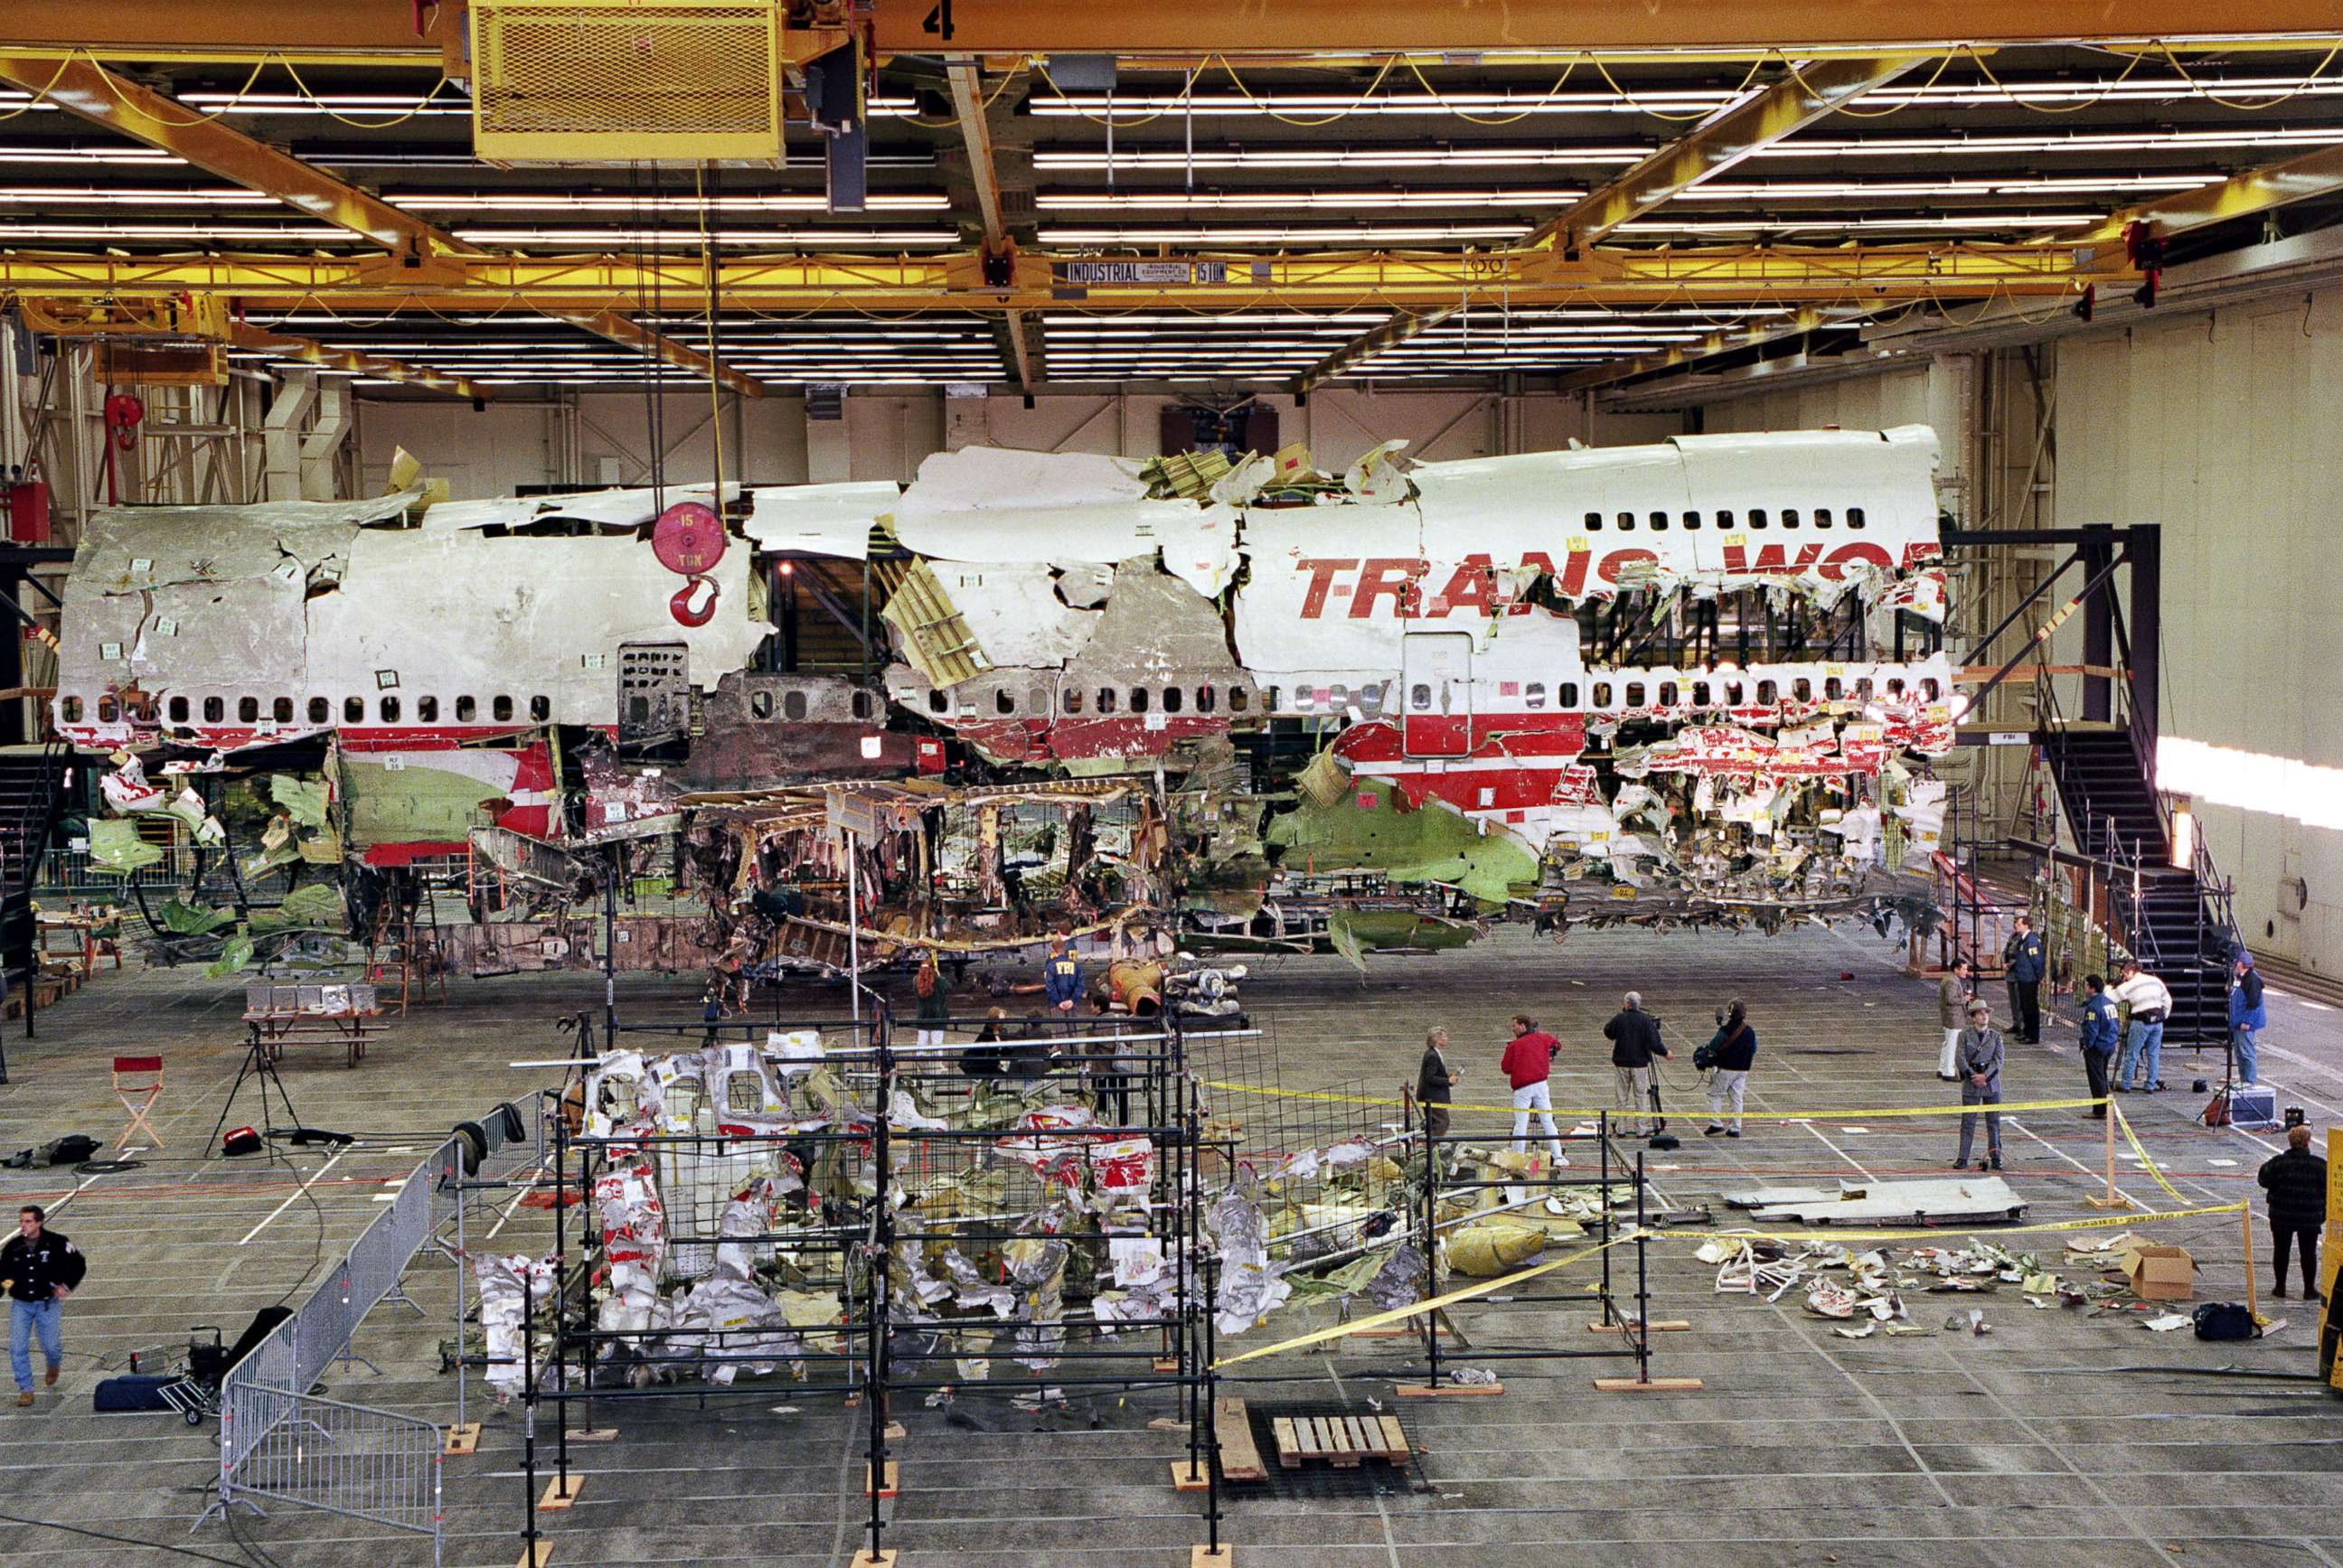 PHOTO: Wreckage of the front portion of the TWA flight 800 Boeing 747 aircraft is displayed in its reconstructed state, Nov. 19, 1997 in Calverton, Long Island, N.Y.